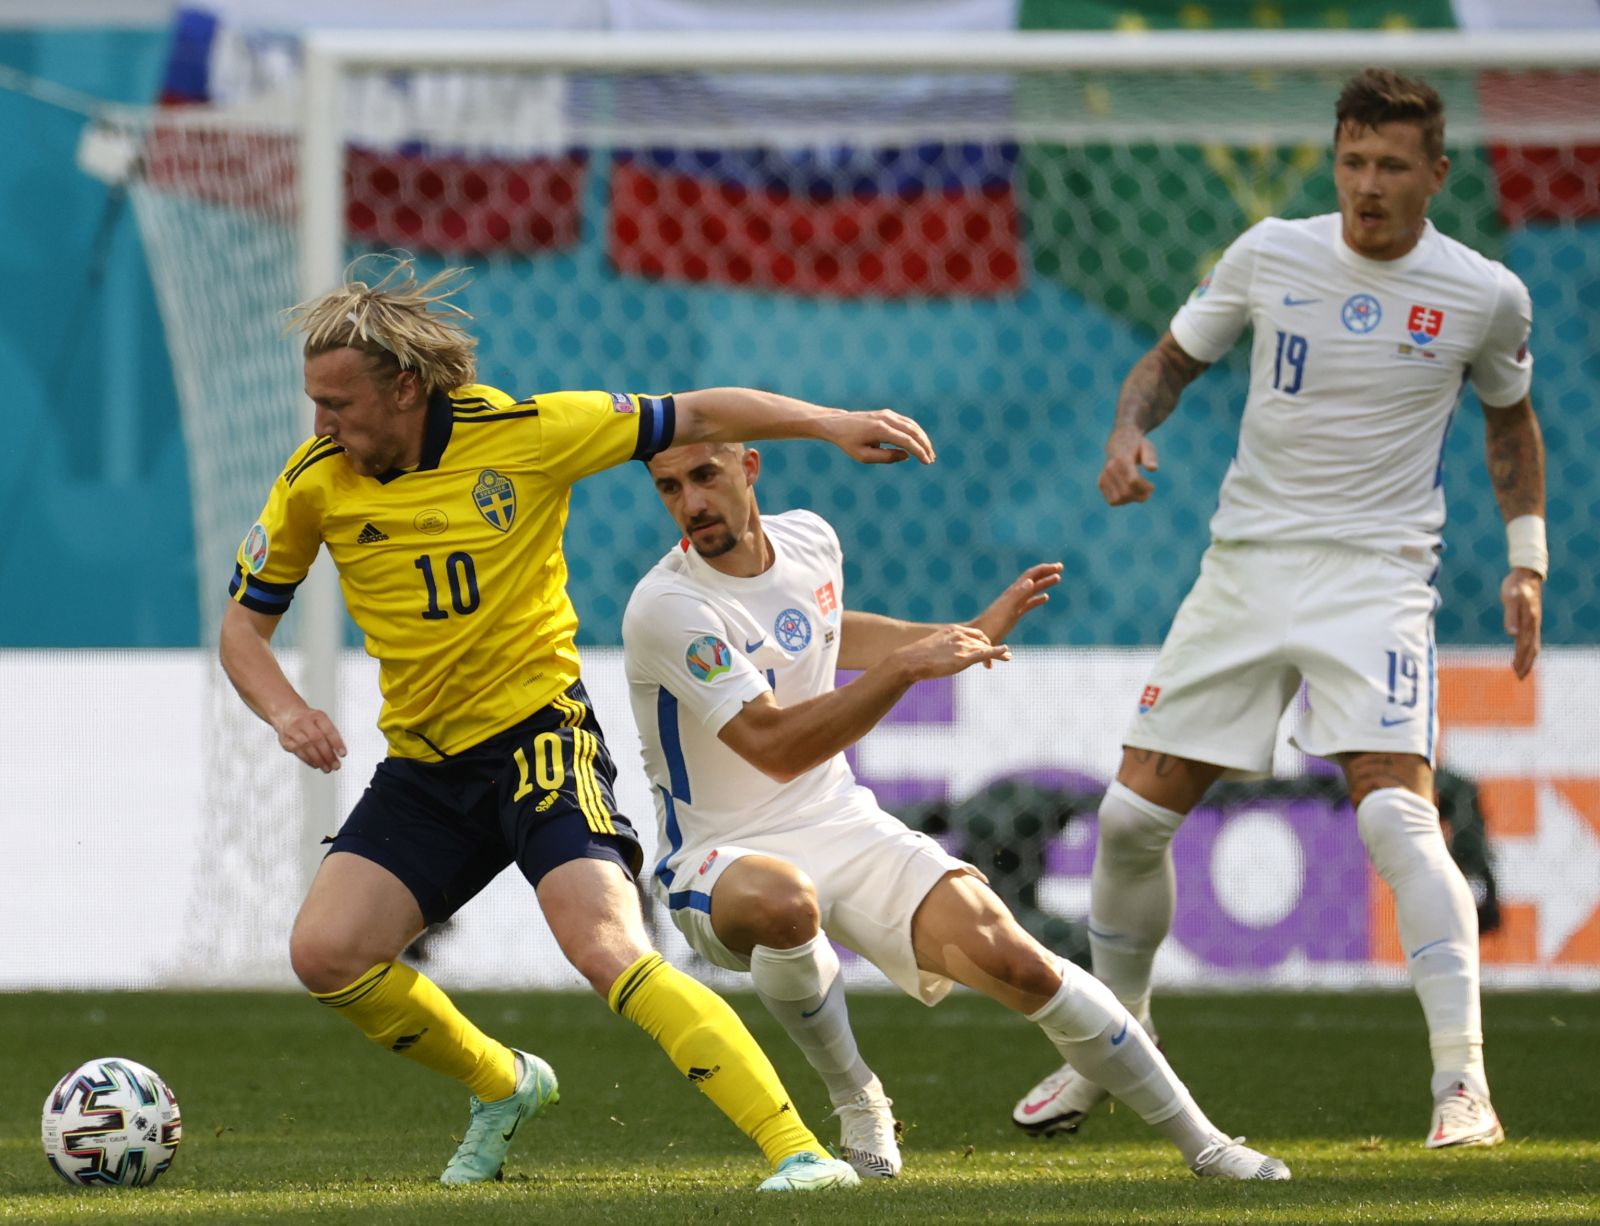 epa09282701 Emil Forsberg (L) of Sweden in action against Martin Koscelnik of Slovakia during the UEFA EURO 2020 group E preliminary round soccer match between Sweden and Slovakia in St.Petersburg, Russia, 18 June 2021.  EPA/Anatoly Maltsev / POOL (RESTRICTIONS: For editorial news reporting purposes only. Images must appear as still images and must not emulate match action video footage. Photographs published in online publications shall have an interval of at least 20 seconds between the posting.)